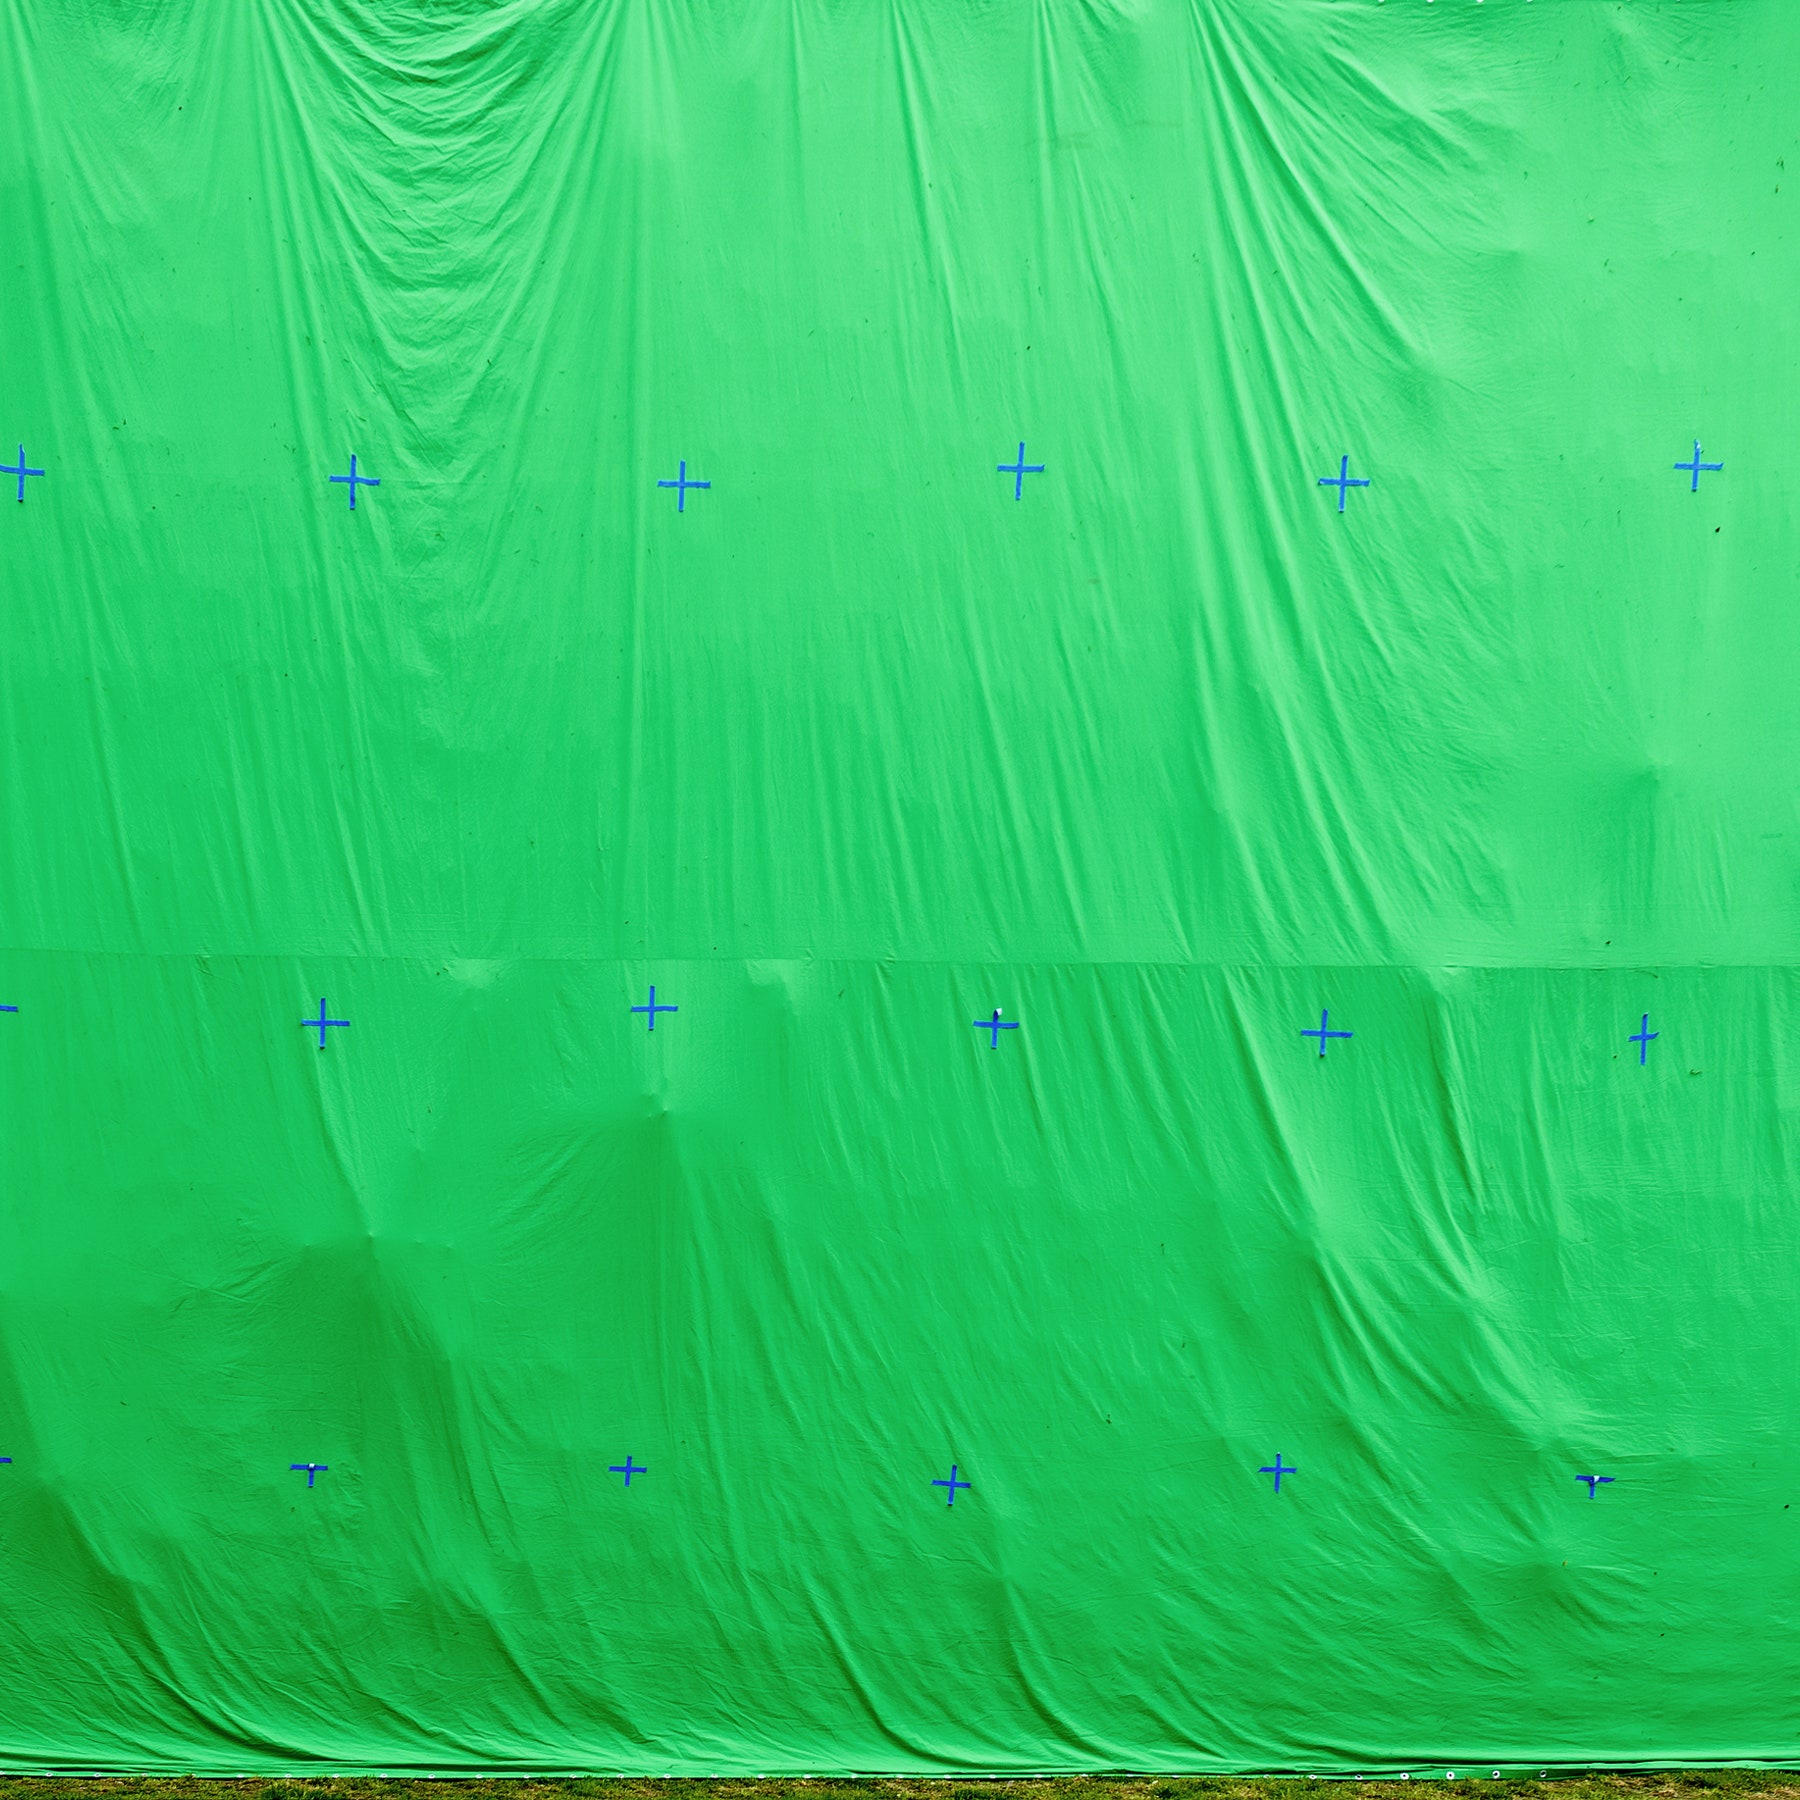 Tips For Using A Green Screen